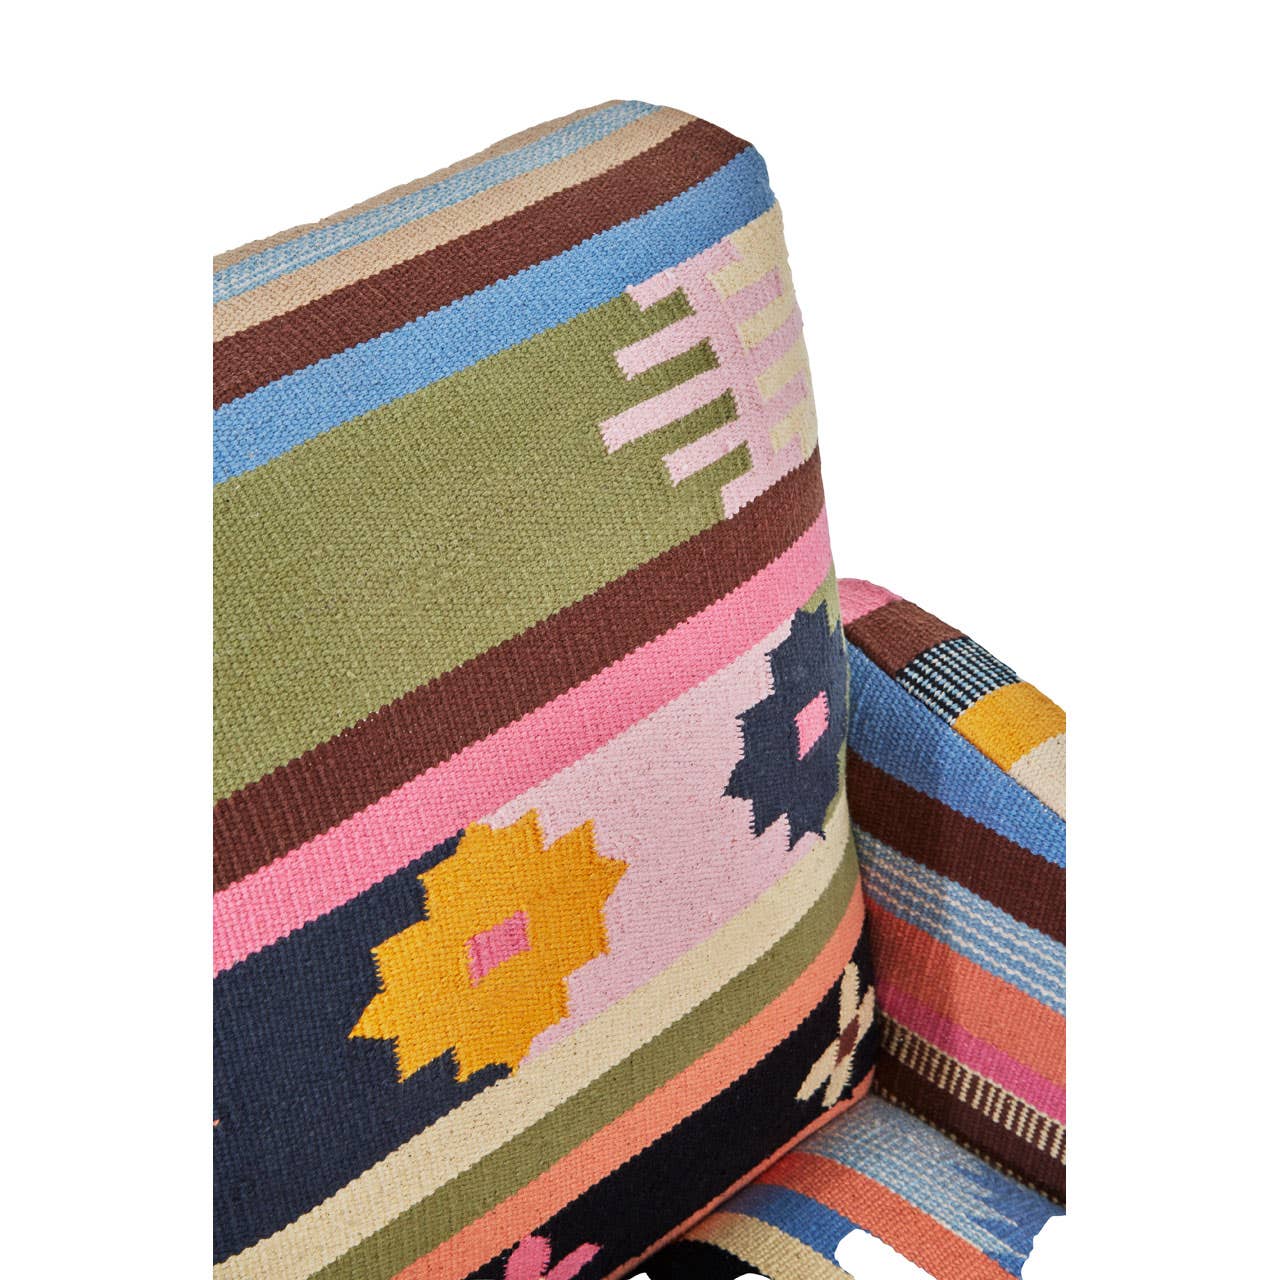 Noosa & Co. Living Cefena Multi-Coloured Fabric Chair With Mango Wood Legs House of Isabella UK